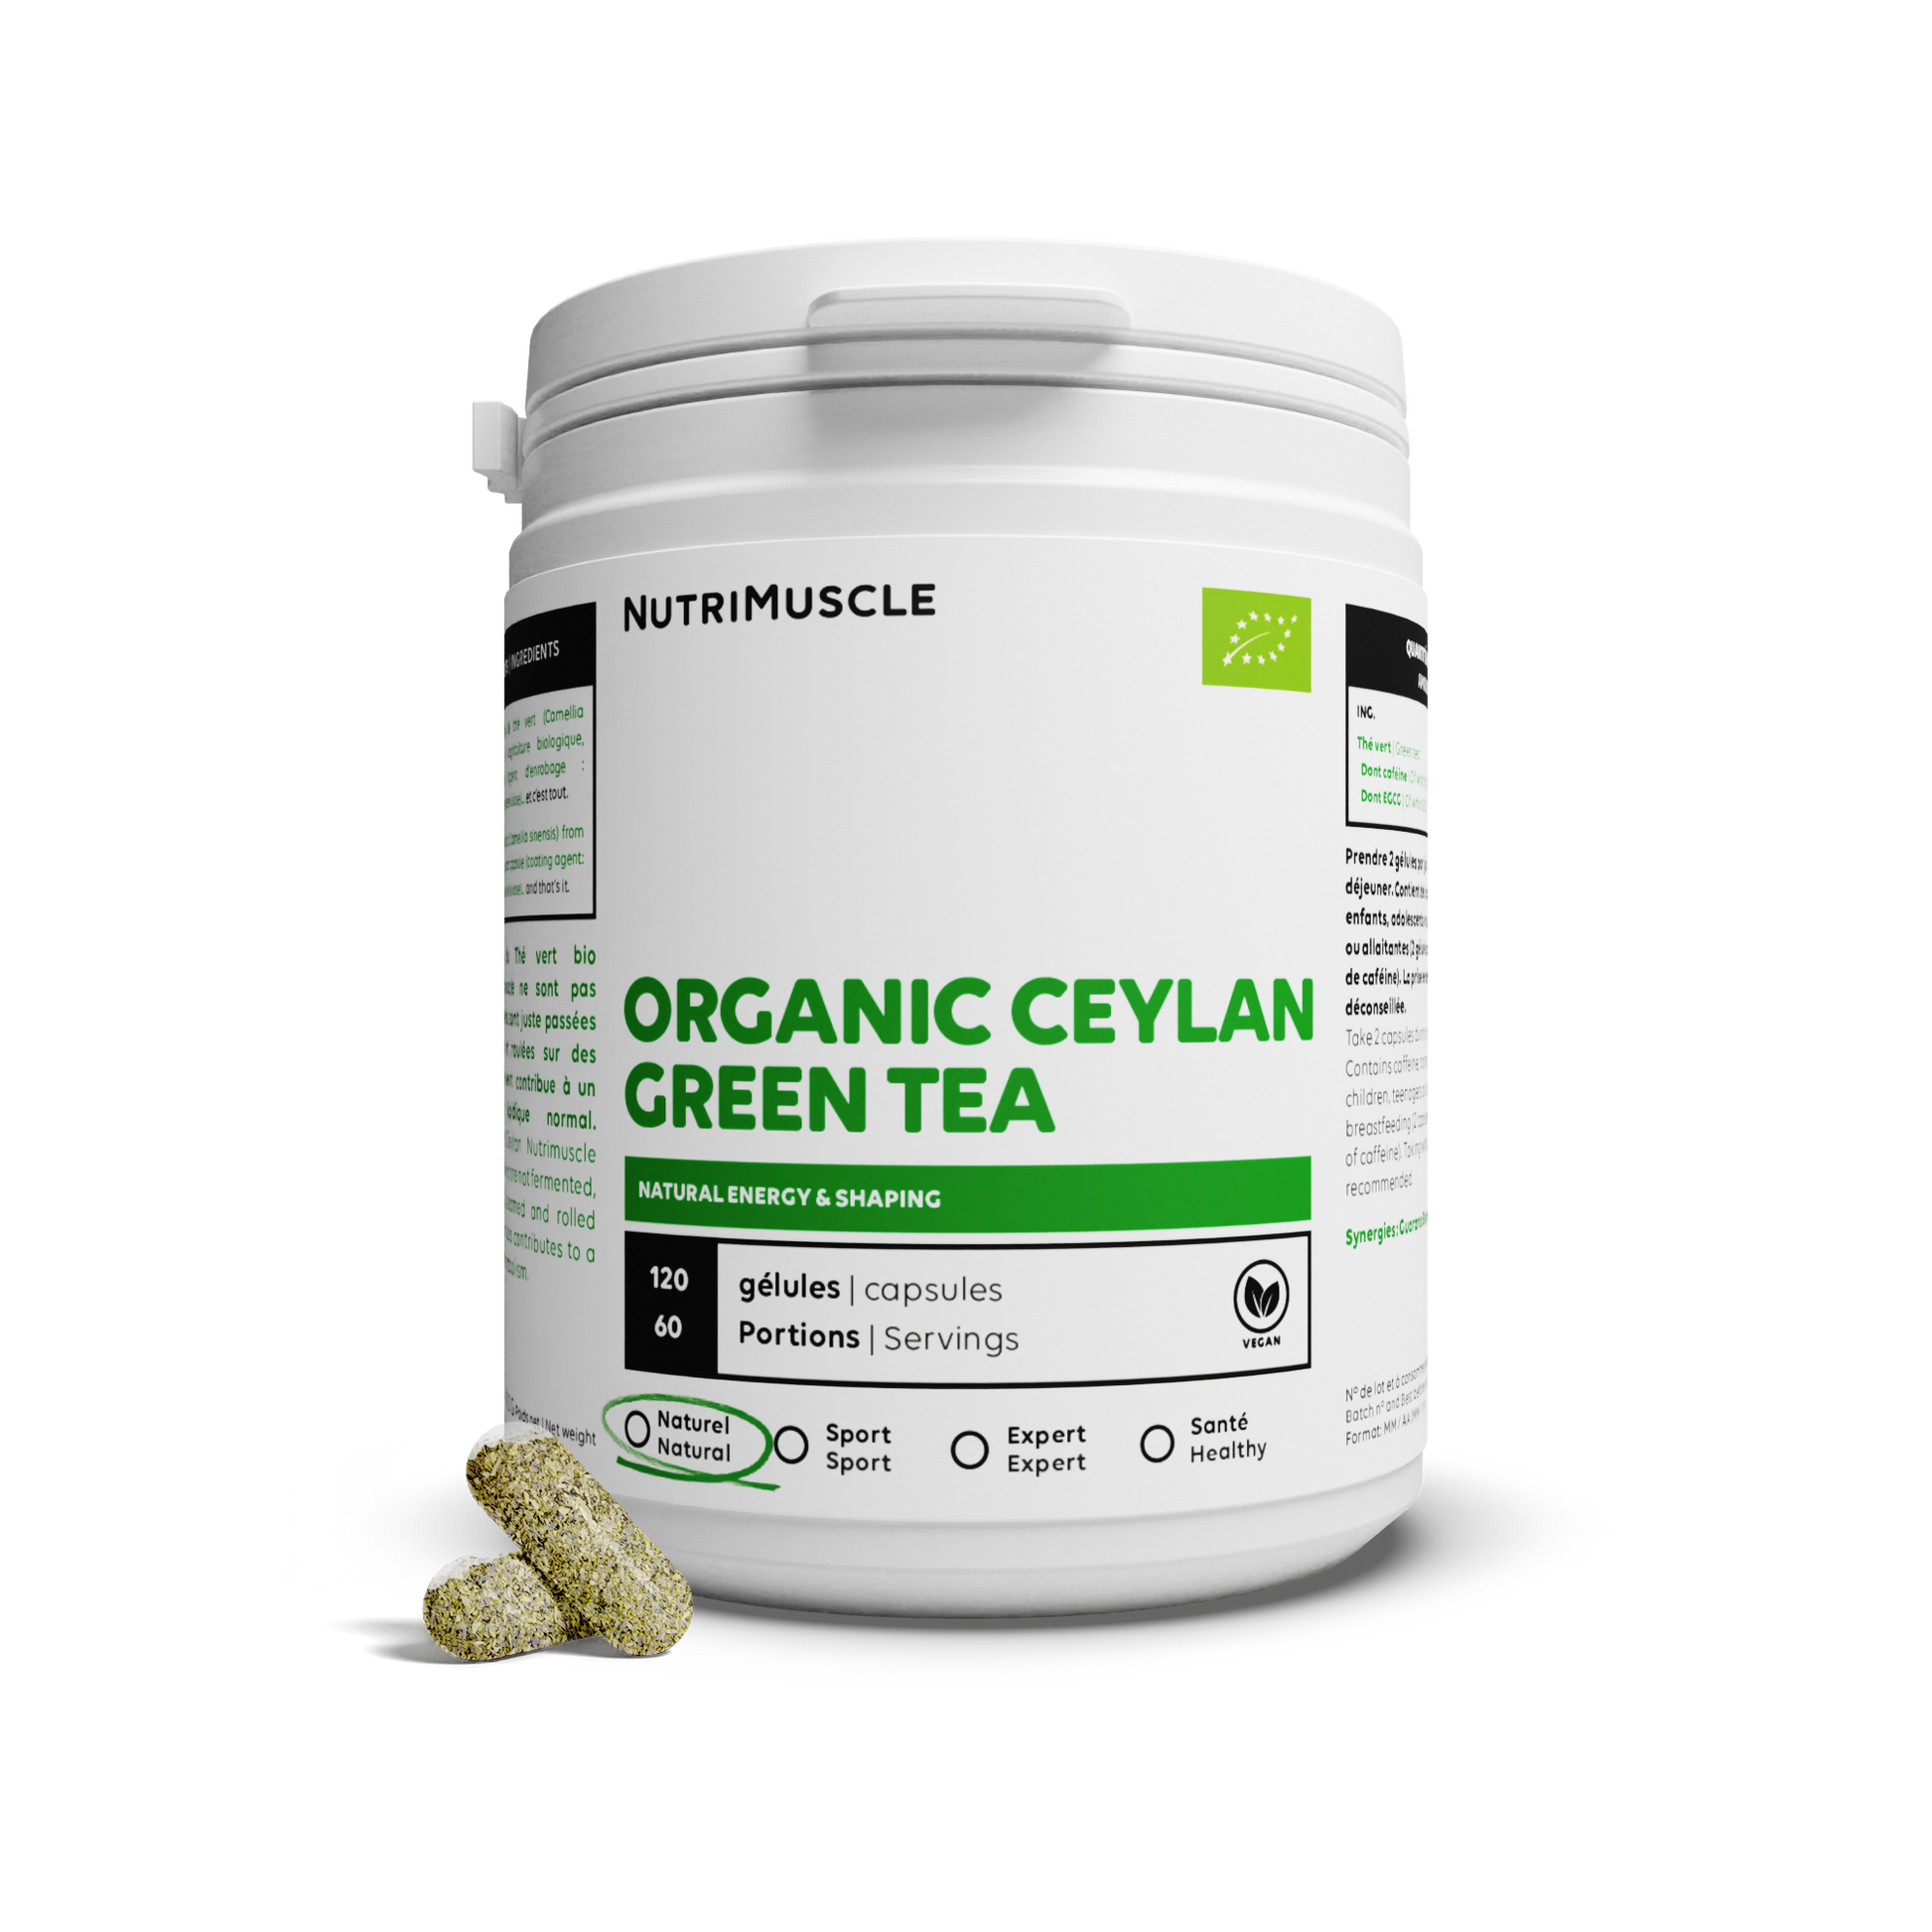 The Green Ceylon Organic - For weight loss